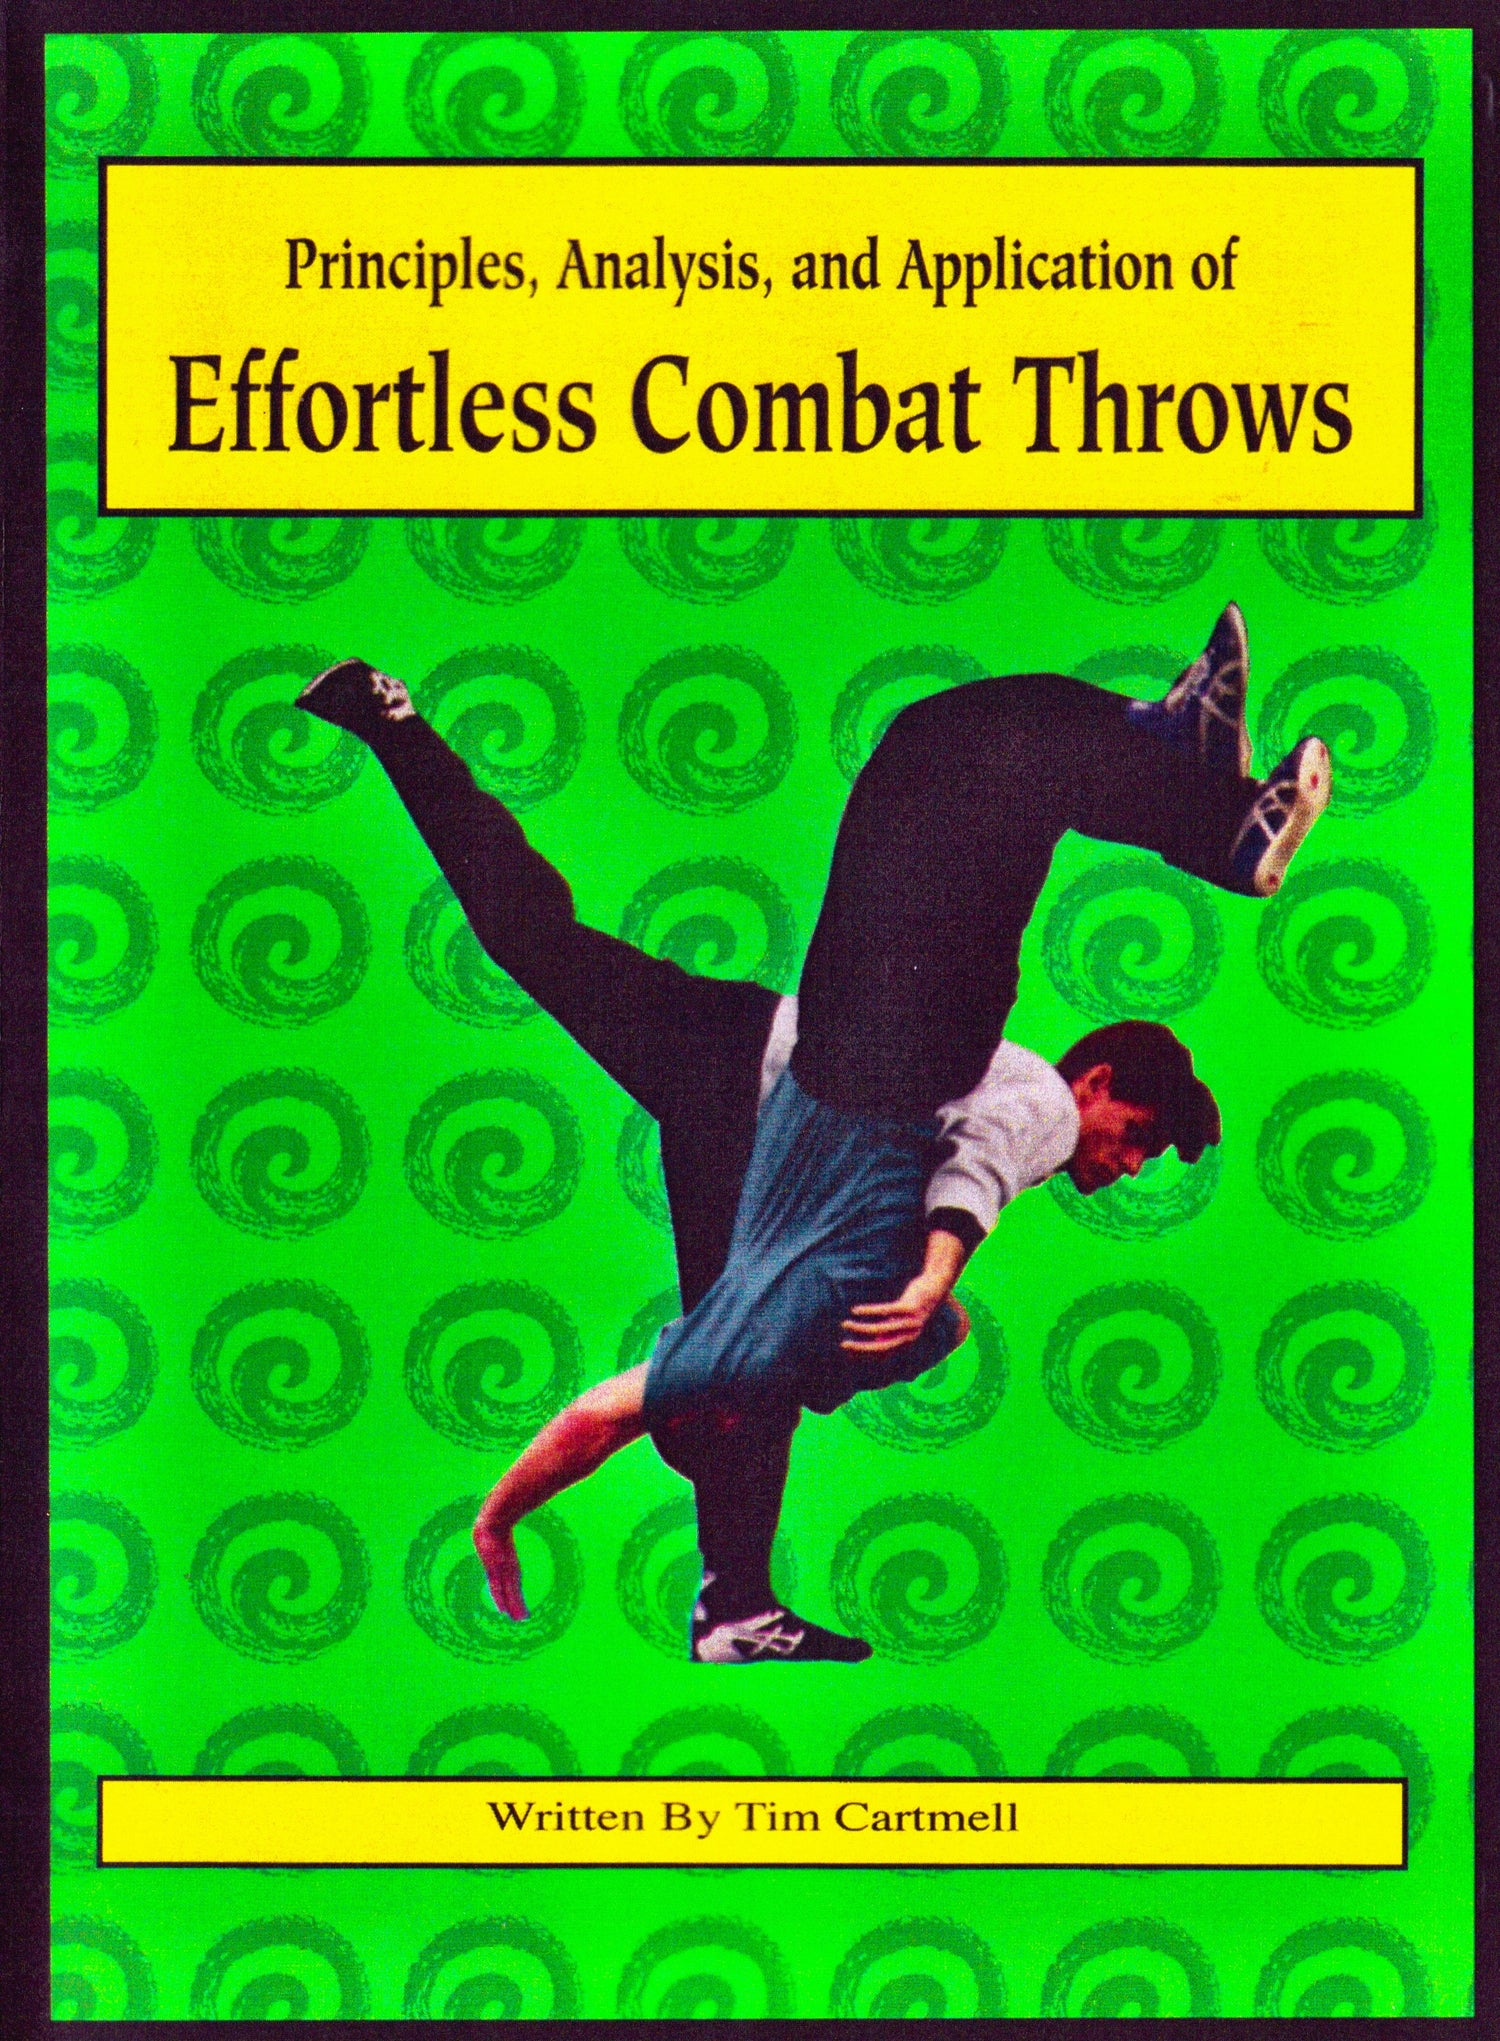 Principles, Analysis & Application of Effortless Combat Throws DVD by Tim Cartmell (Preowned) - Budovideos